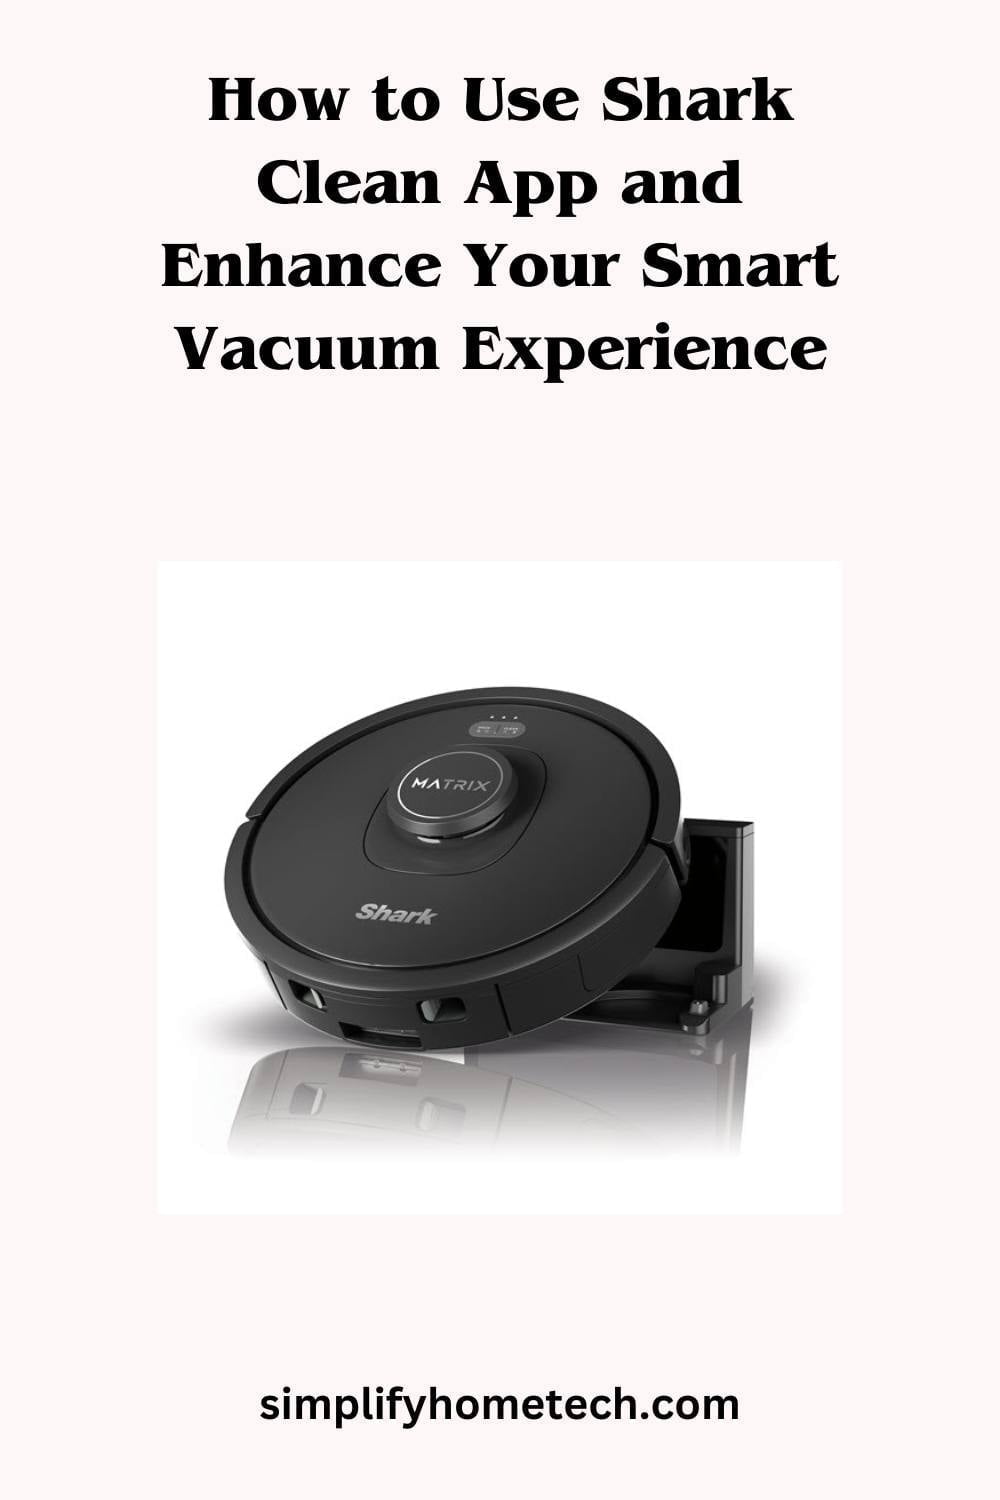 How to Use Shark Clean App and Enhance Your Smart Vacuum Experience